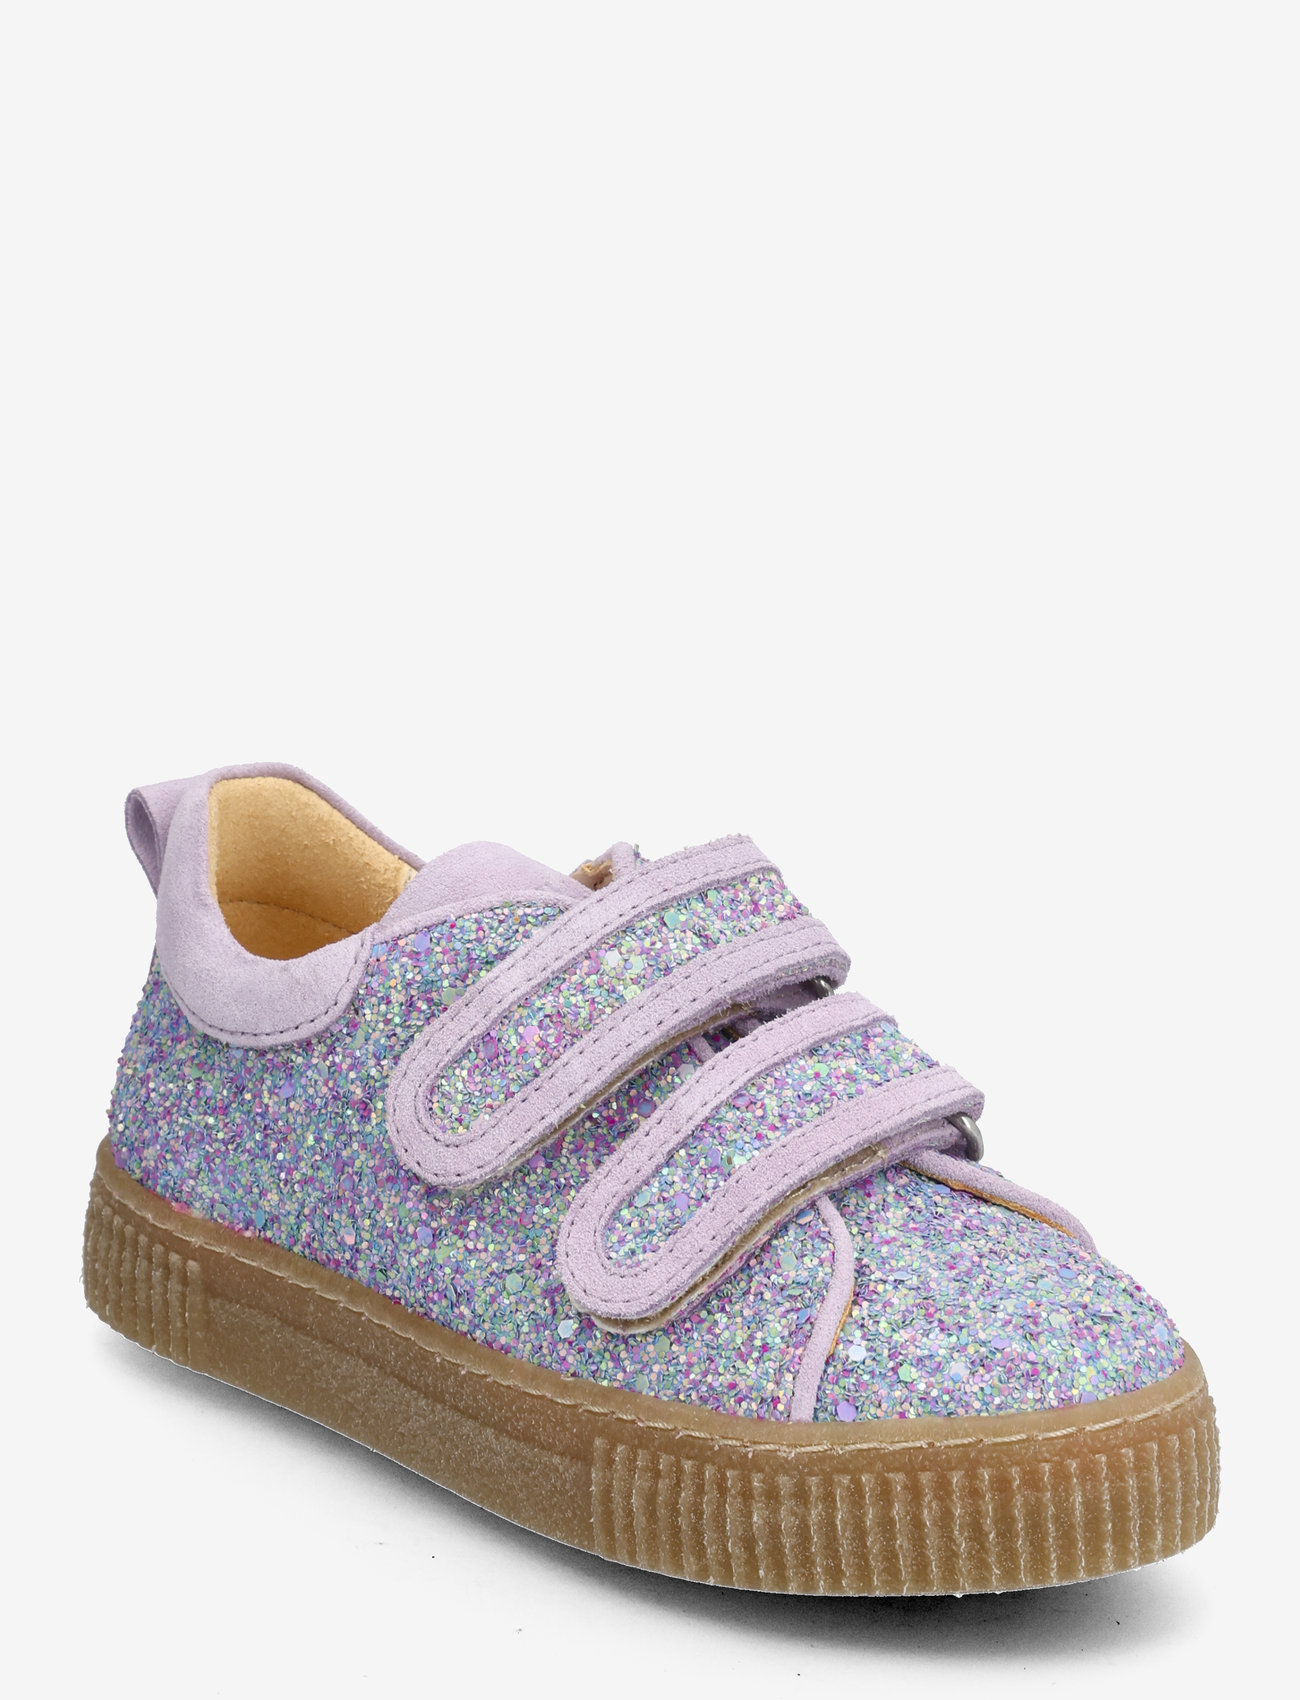 ANGULUS - Shoes - flat - with velcro - sommerkupp - 2753/2245 confetti glitter/lil - 0